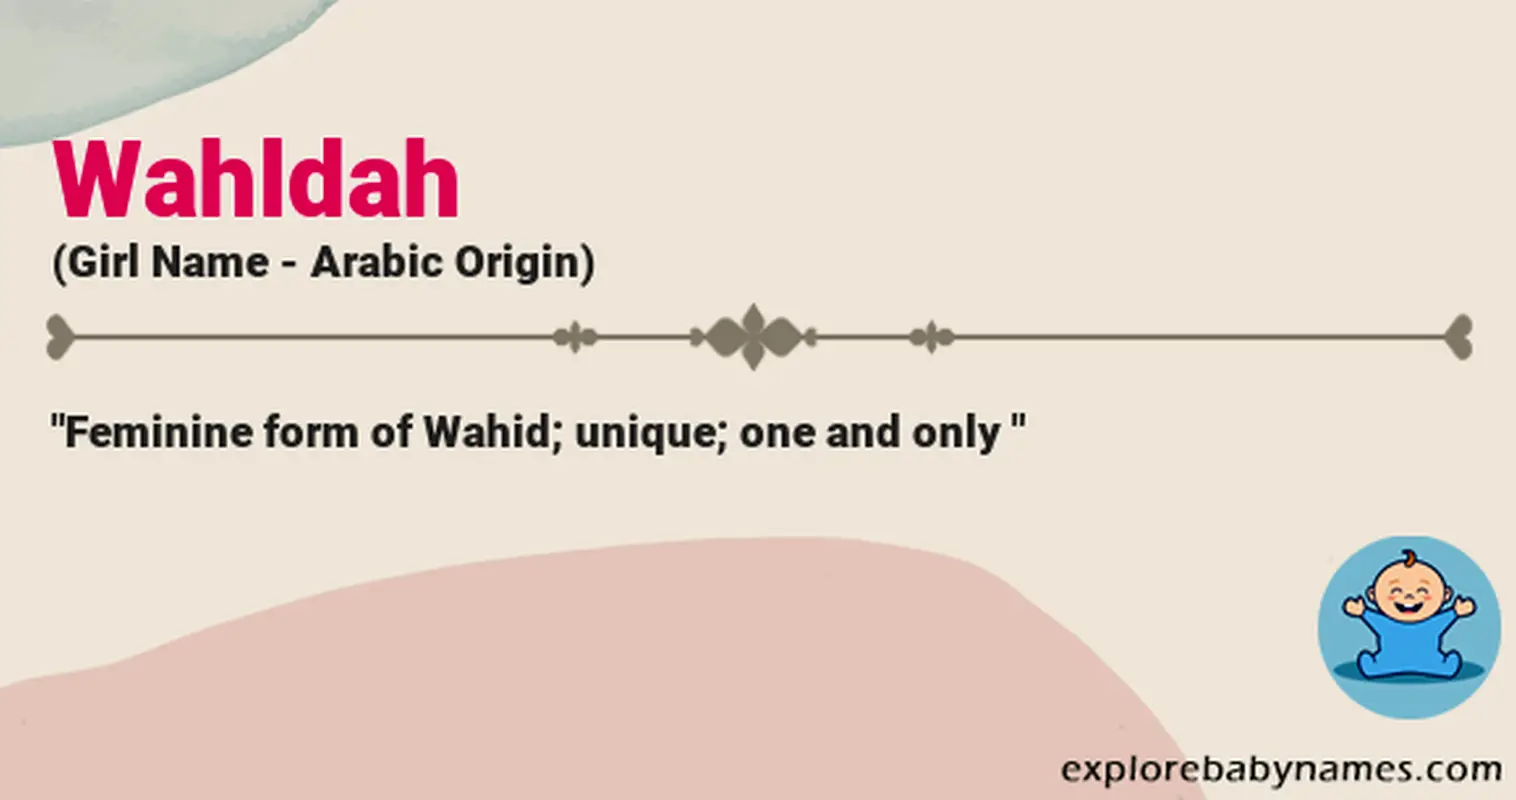 Meaning of Wahldah